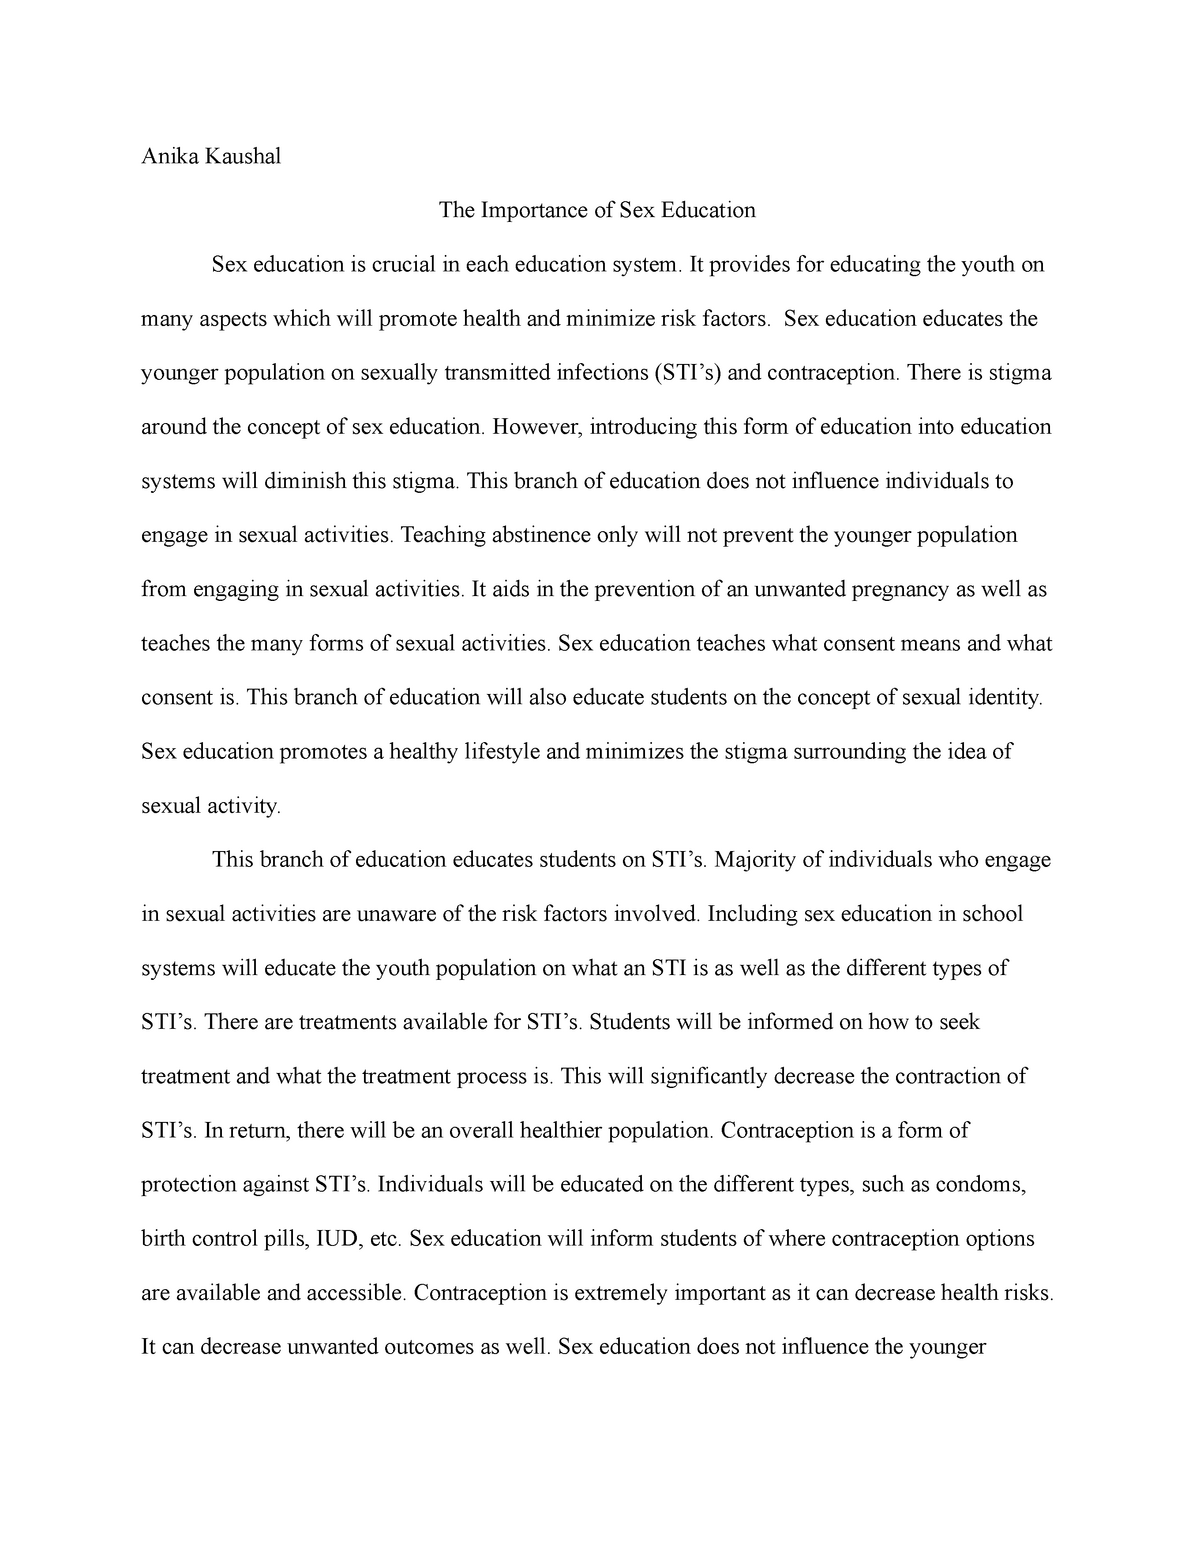 thesis in sex education